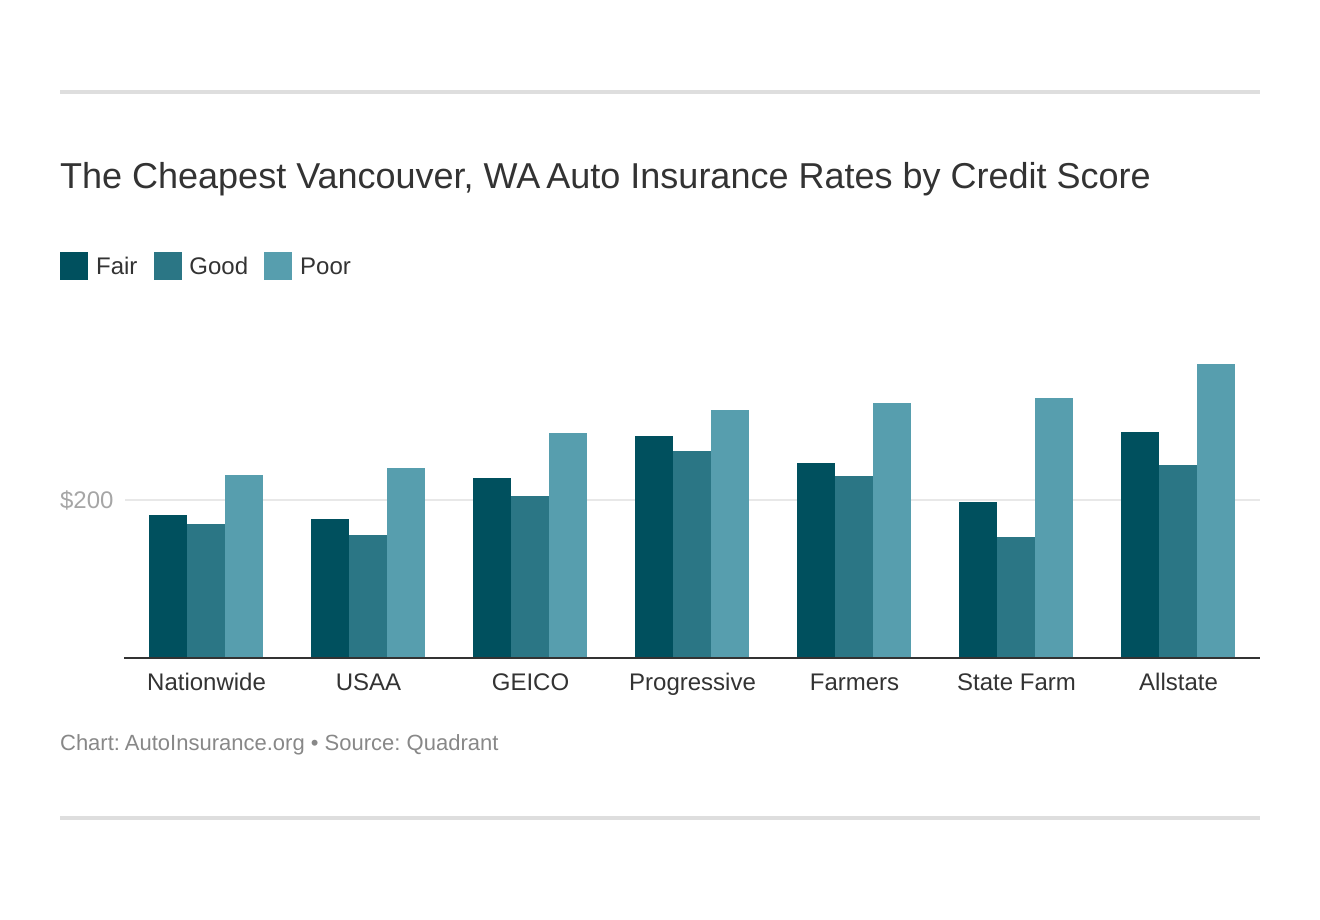 The Cheapest Vancouver, WA Auto Insurance Rates by Credit Score